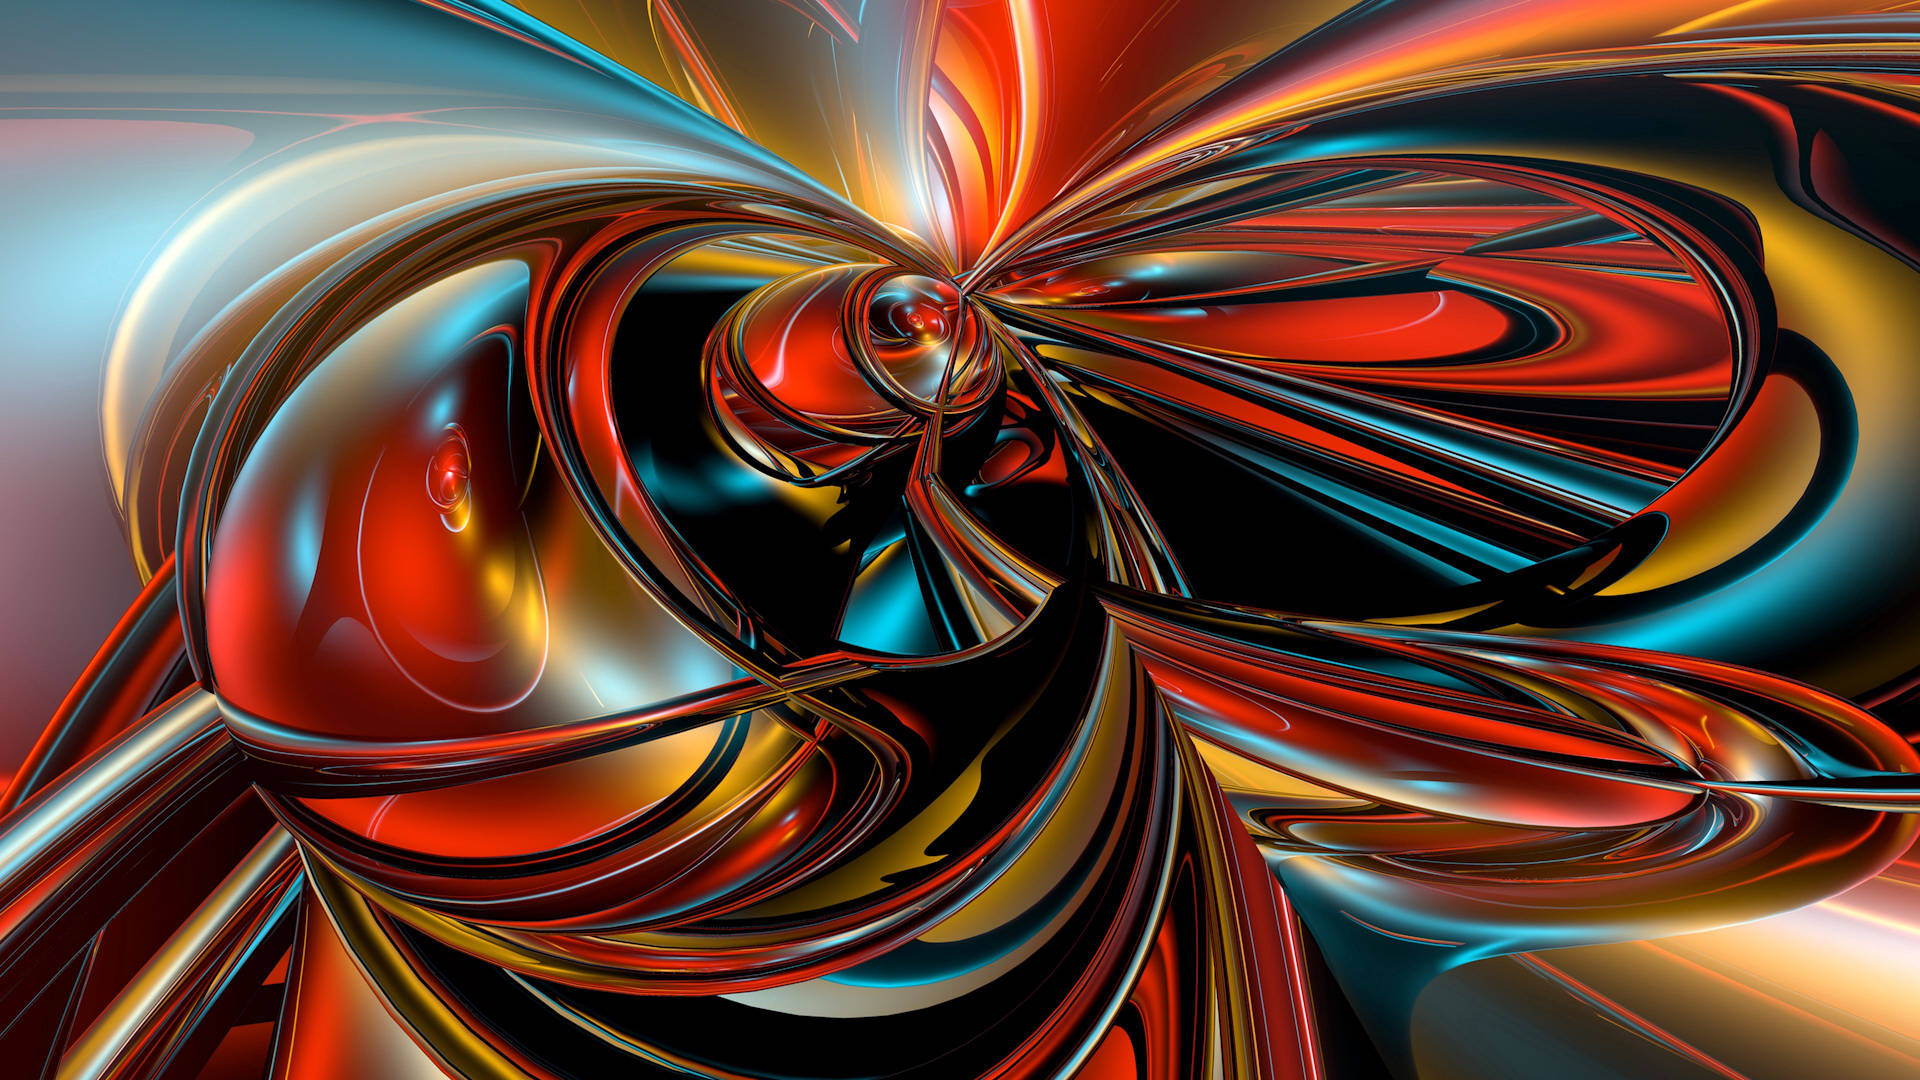 A Psychedelic Abstract Artwork in Vibrant 3D Color Wallpaper